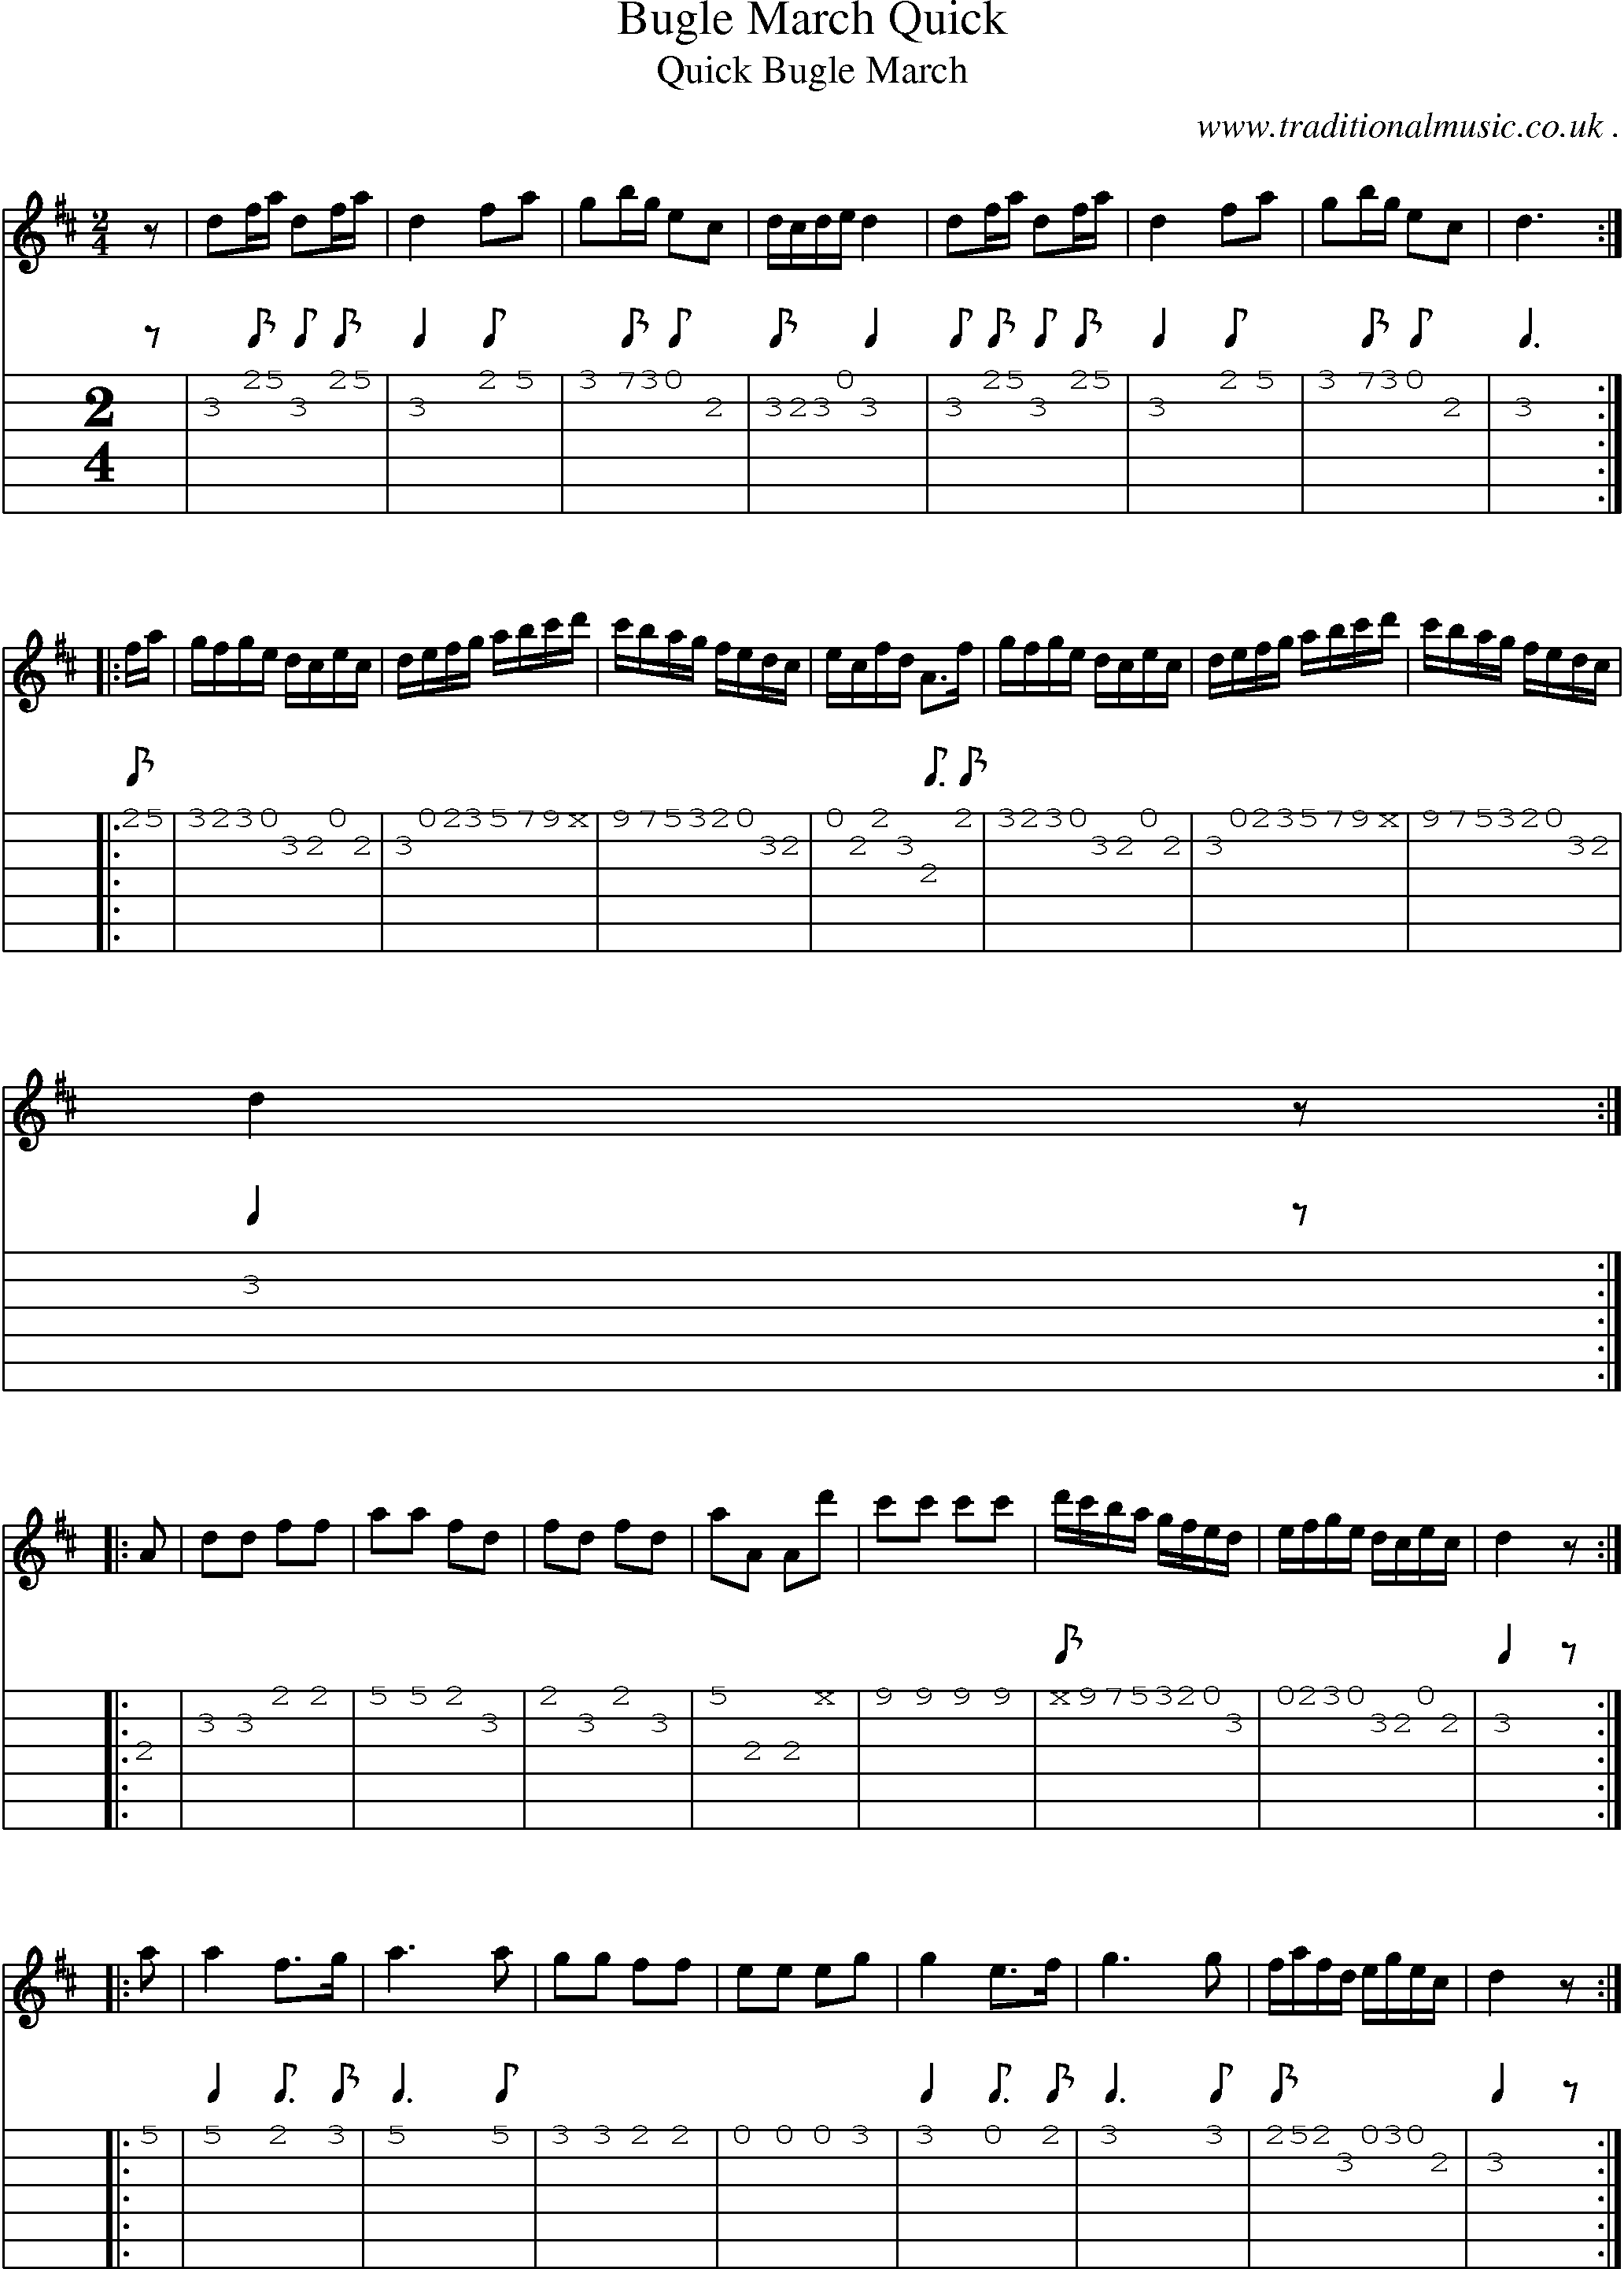 Sheet-Music and Guitar Tabs for Bugle March Quick